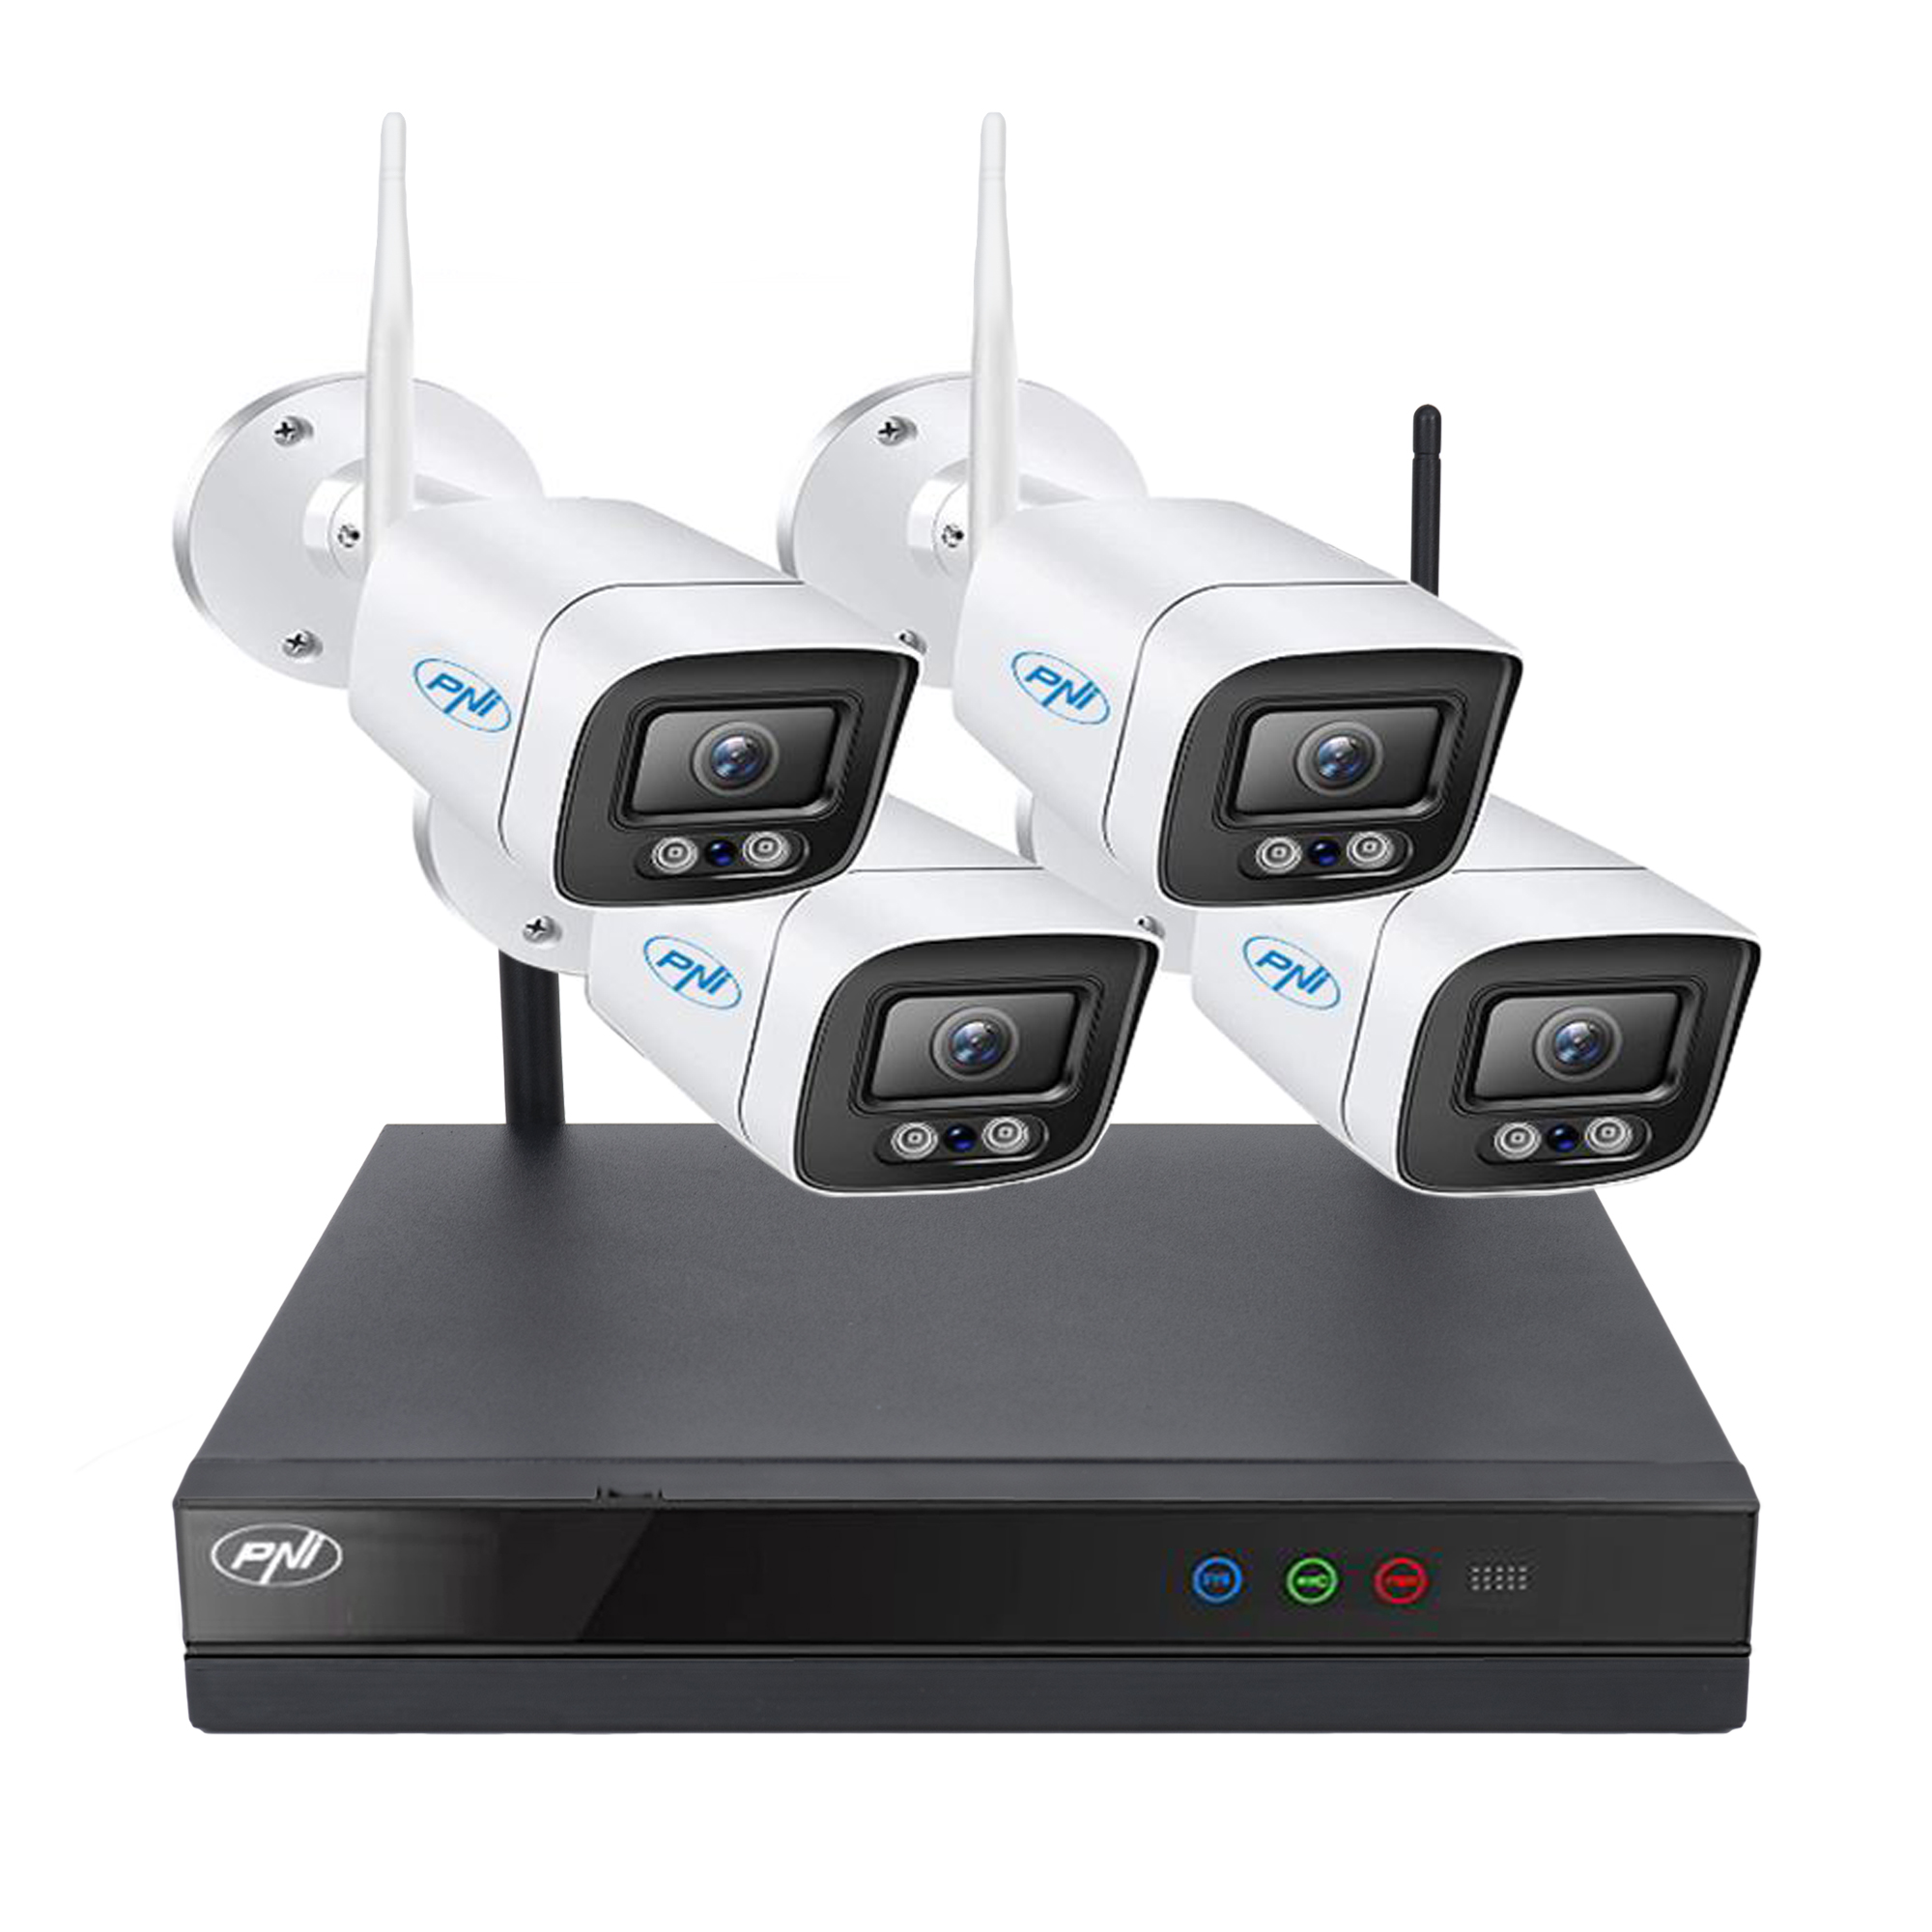 Kit supraveghere video PNI House WiFi630 NVR 8 canale si 4 camere wireless de exterior 3Mpx, P2P, IP66